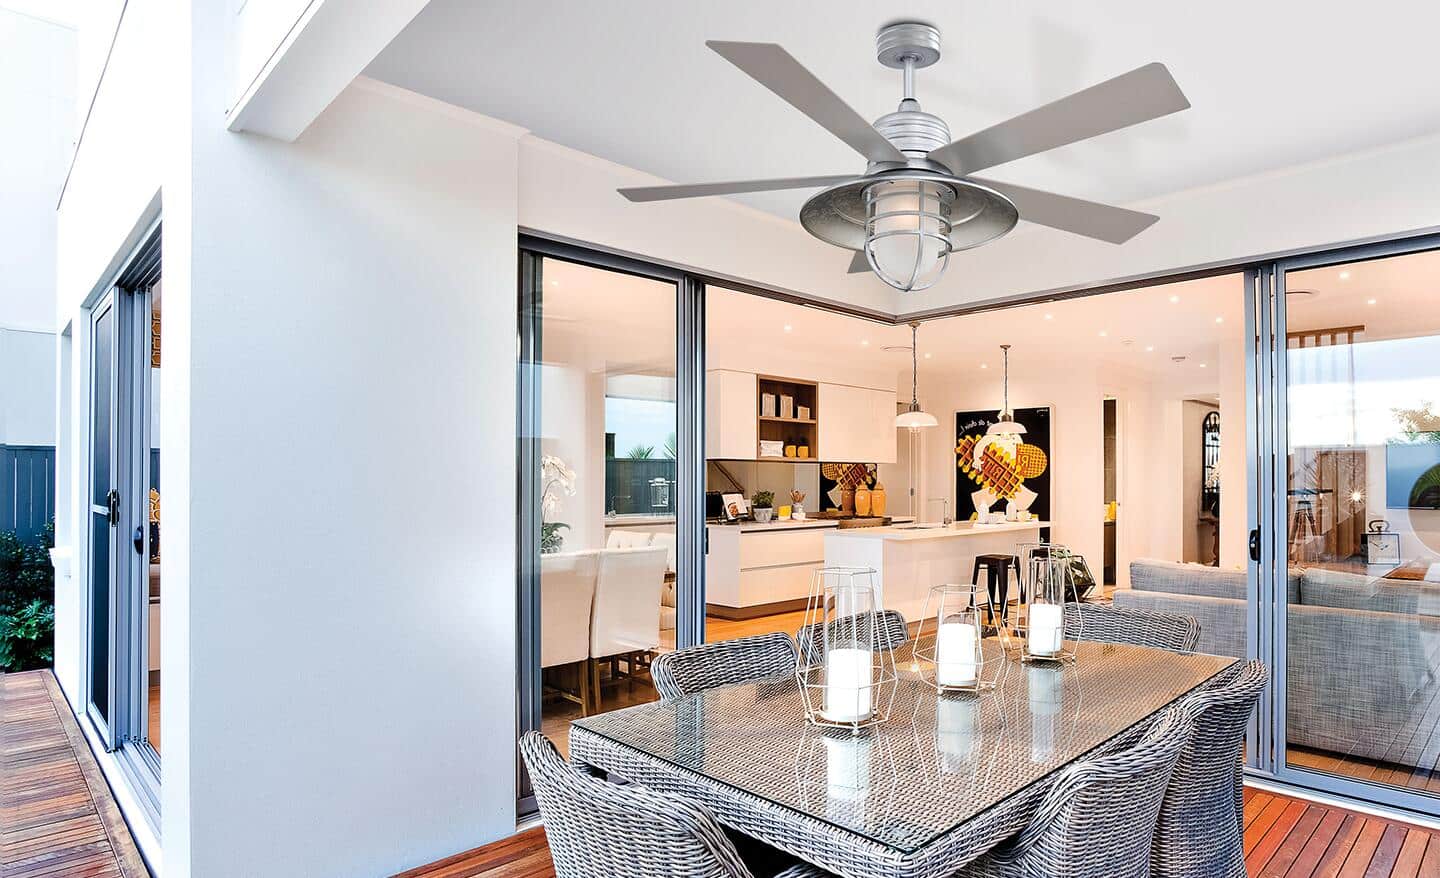 A large ceiling fan installed over a formal dining room.